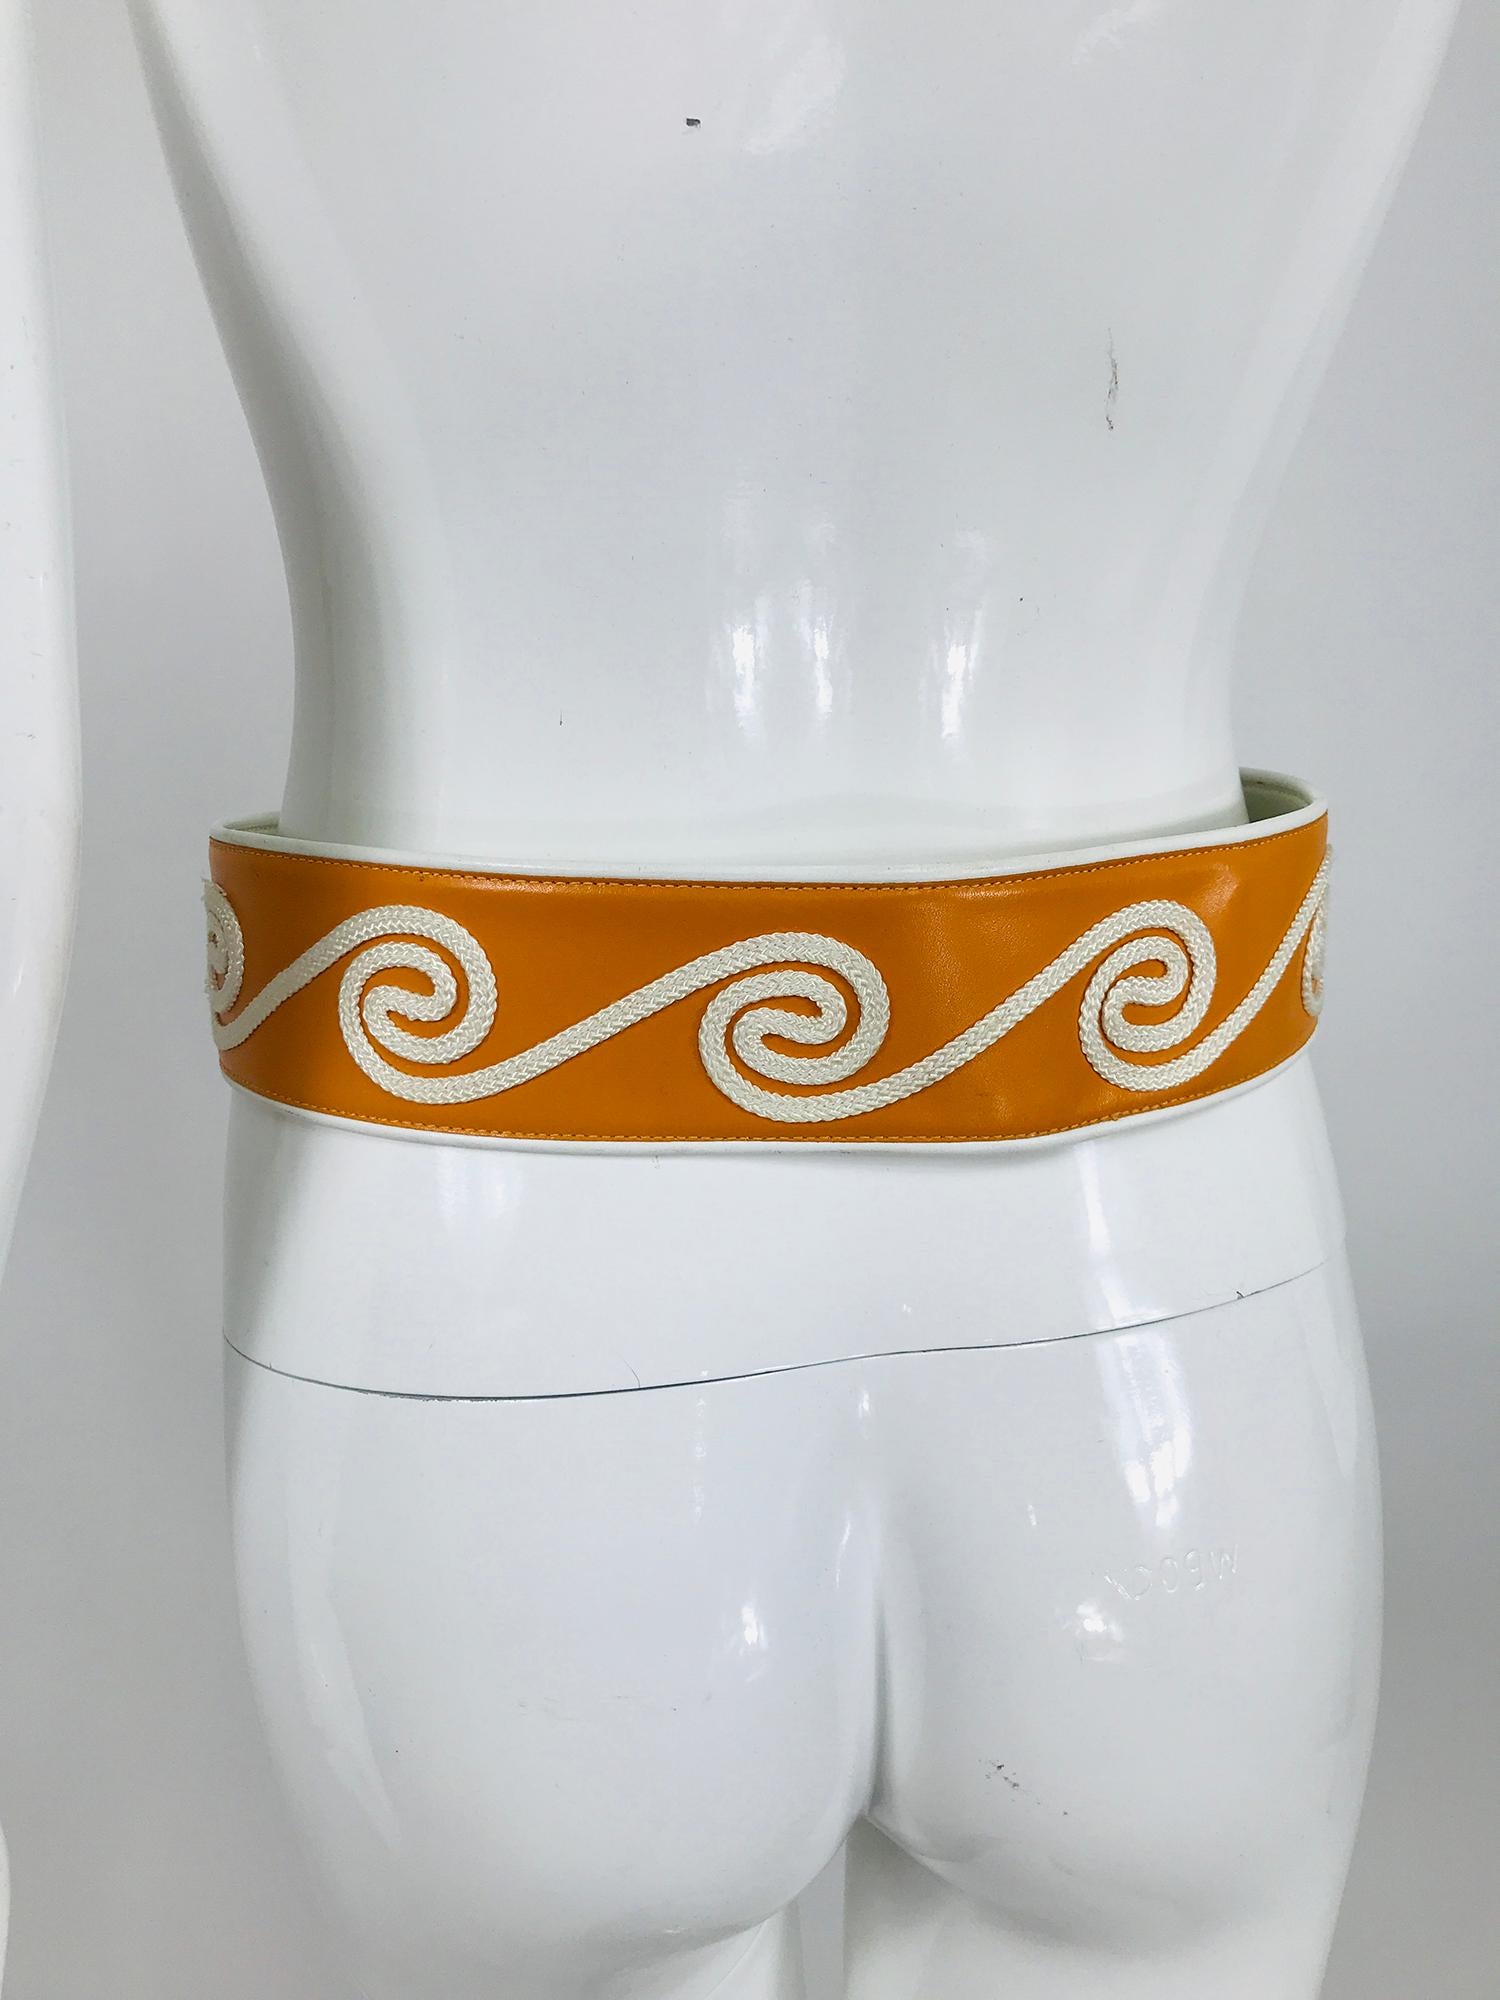  Christian Dior White & Golden Yellow Cord Applique Wide Leather Belt M-L 1990s For Sale 1